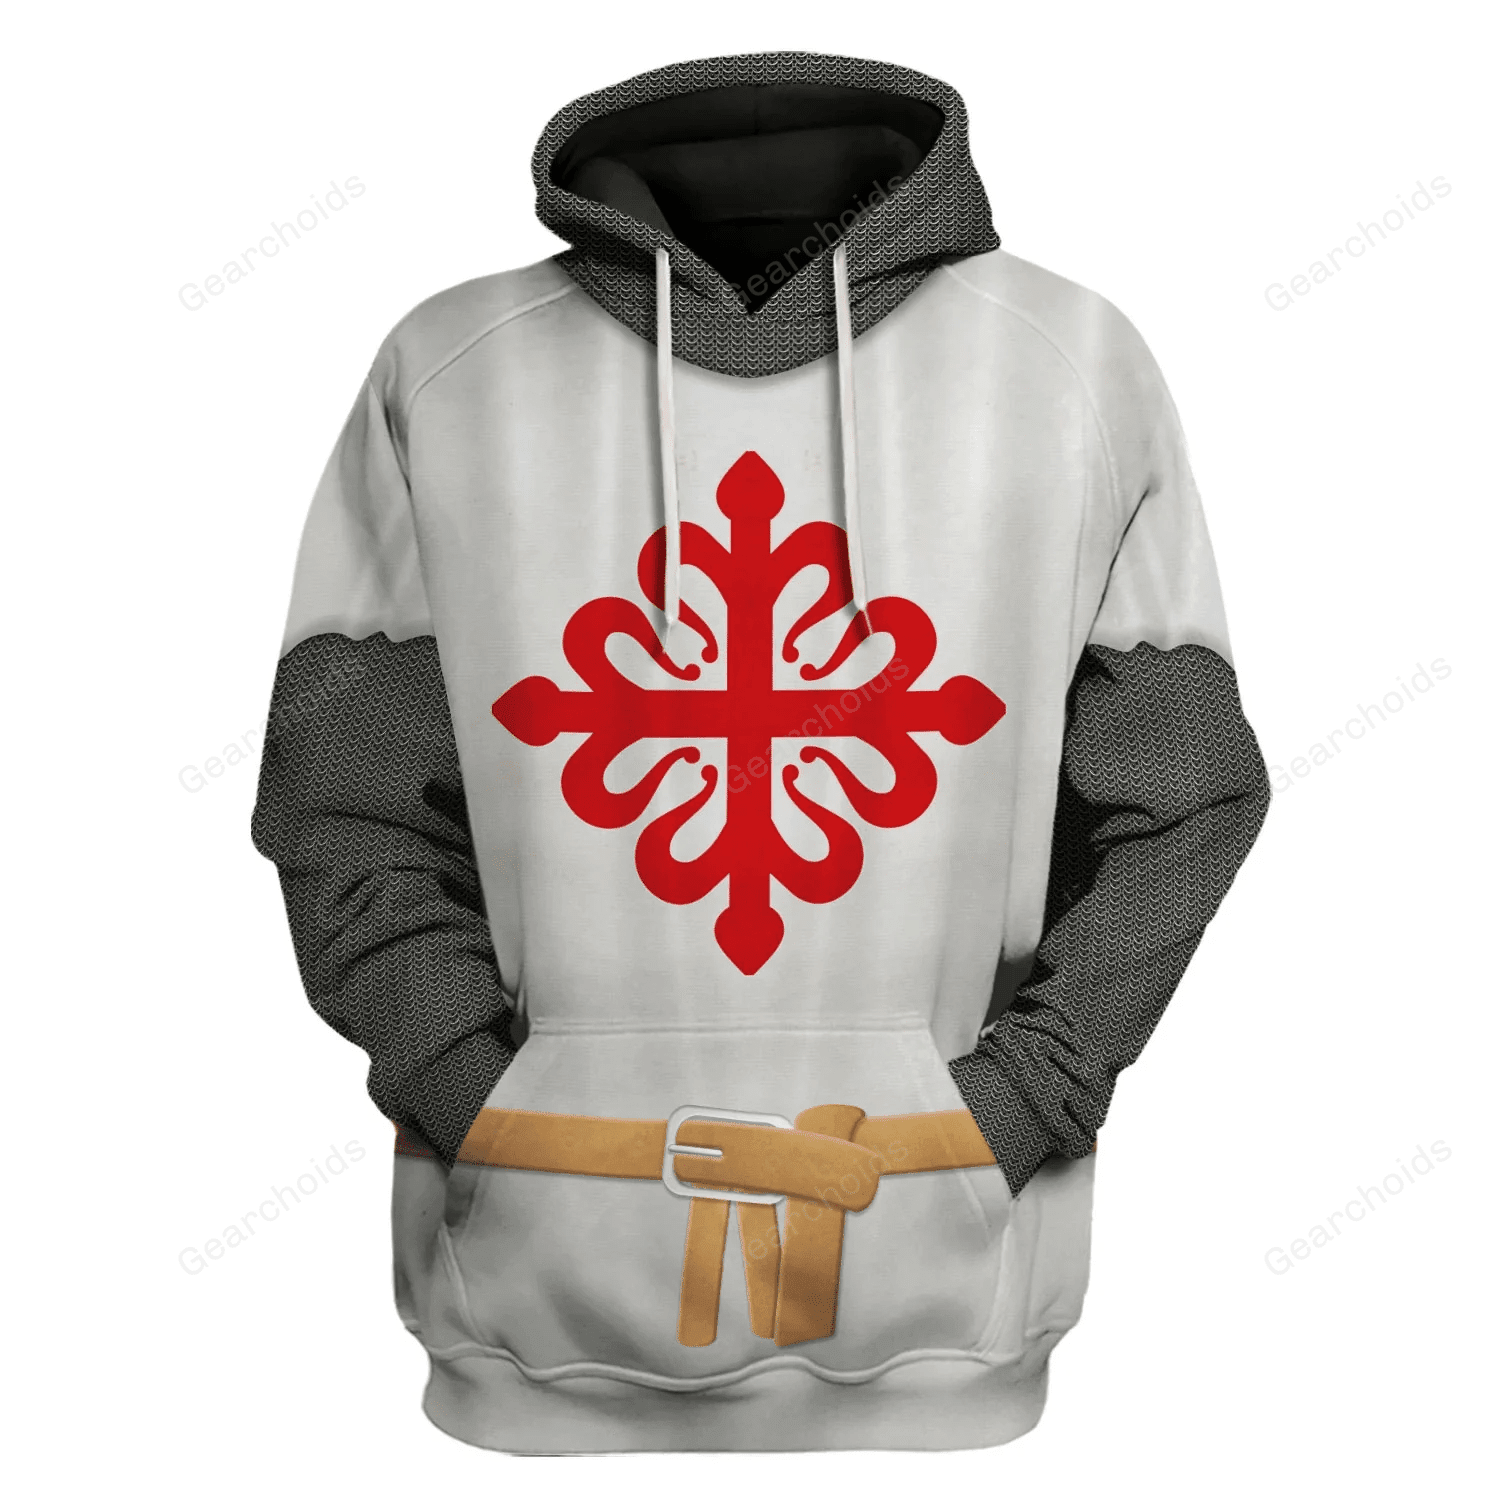 Gearchoids Knights With The Order Of Calatrava Costume Hoodie Sweatshirt T-Shirt Tracksuit